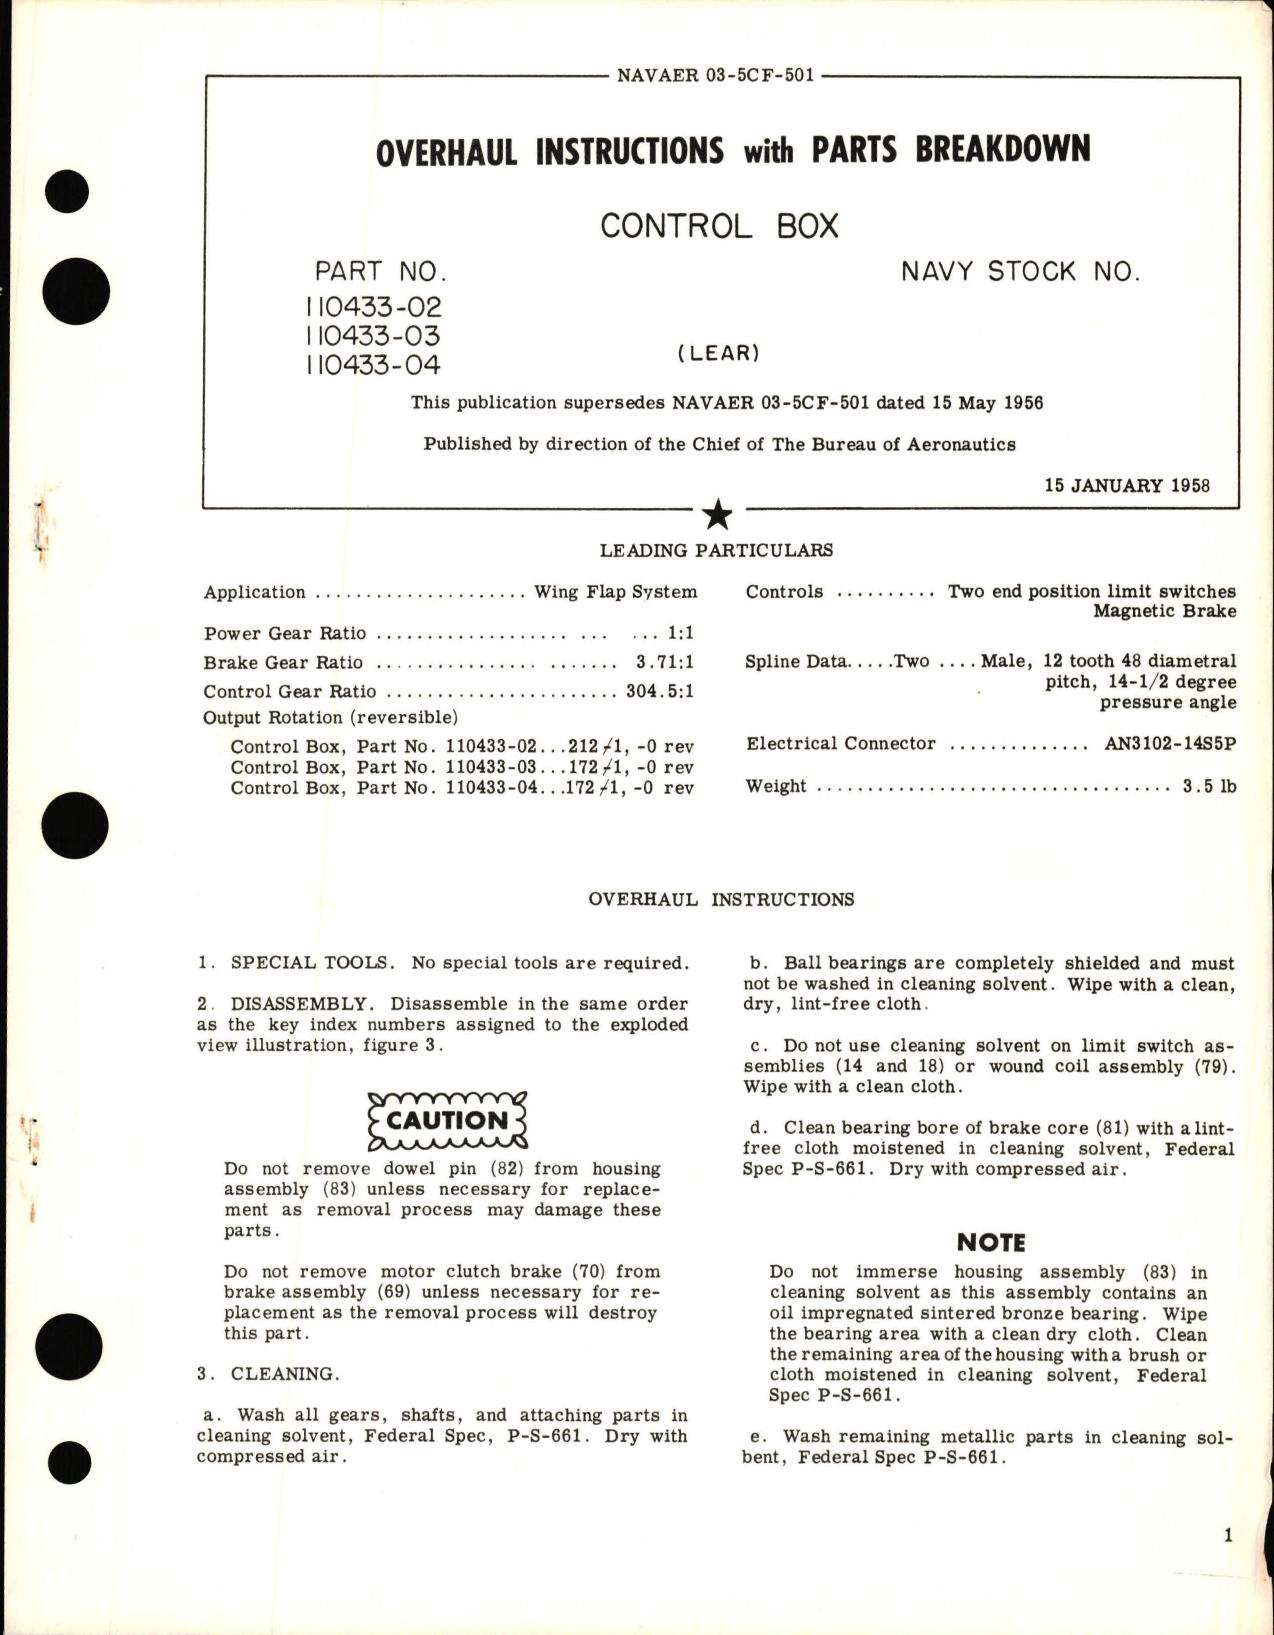 Sample page 1 from AirCorps Library document: Overhaul Instructions with Parts Breakdown for Control Box - Parts 110433-02, 110433-03 and 110433-04